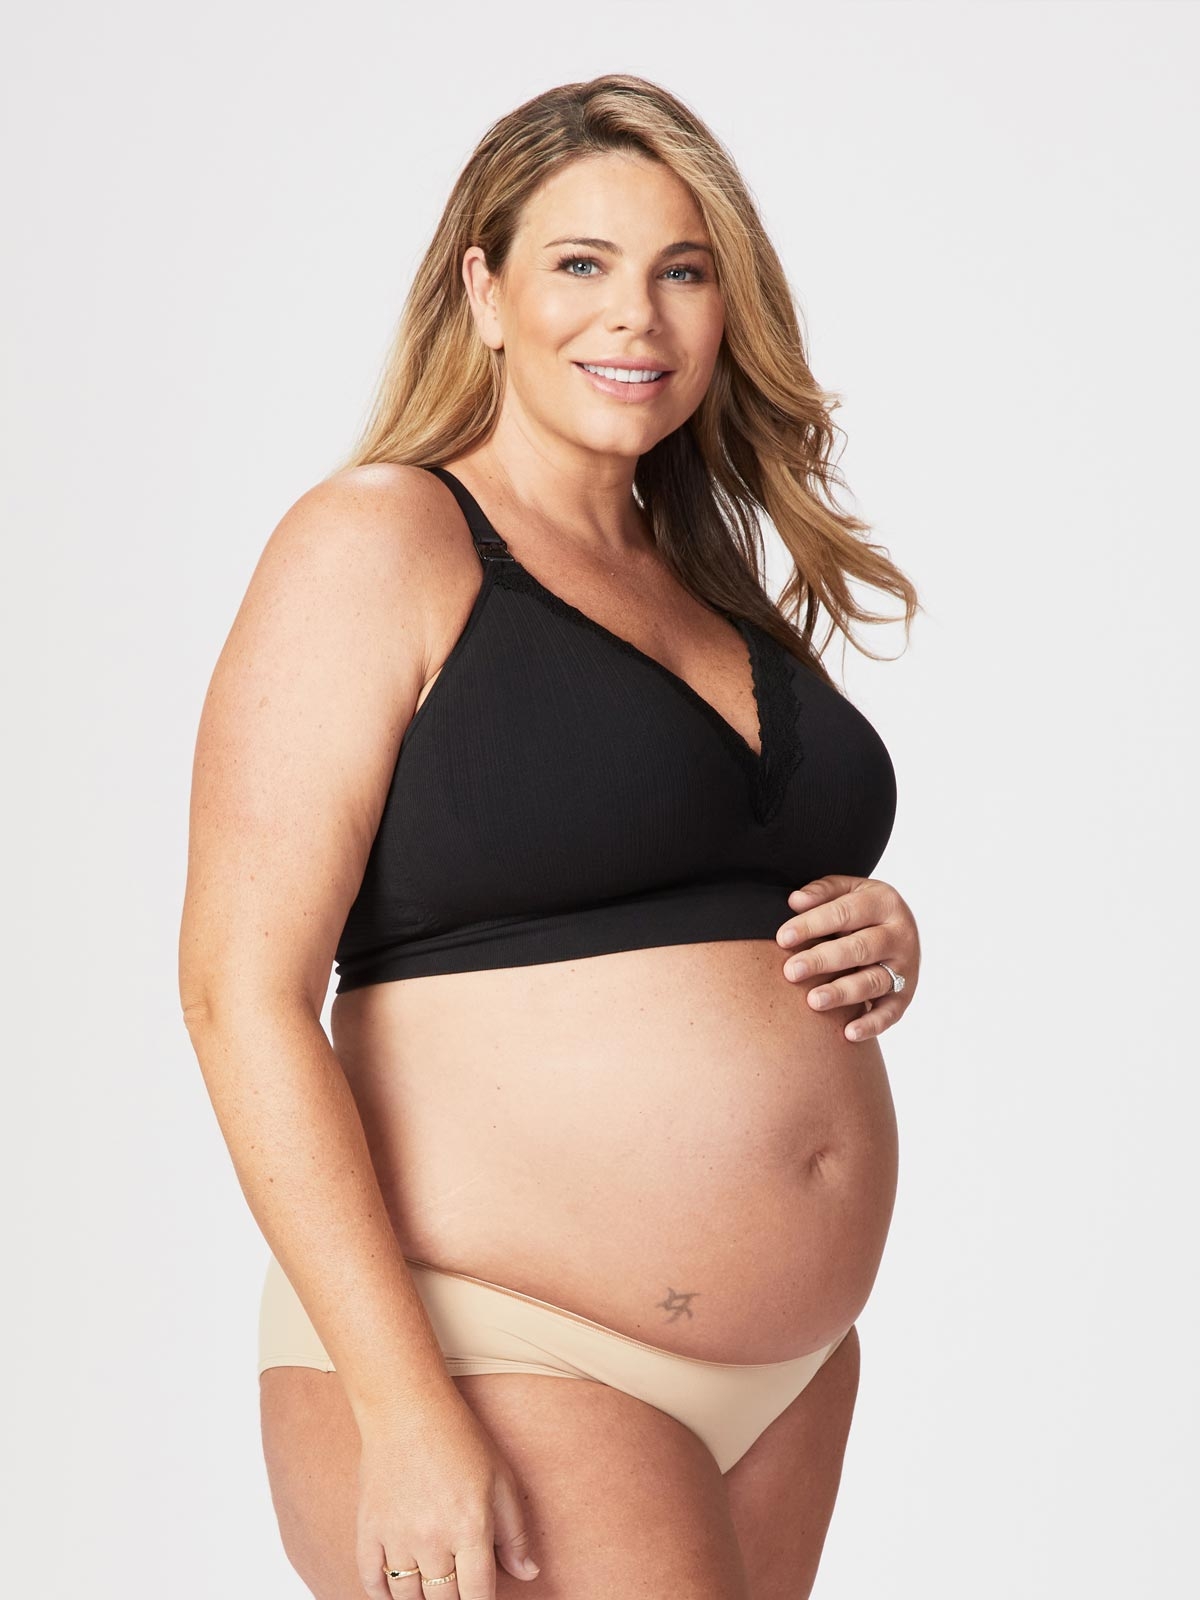 Maternity & Nursing Bra with Shape Memory, by CARRIWELL - beige, Maternity